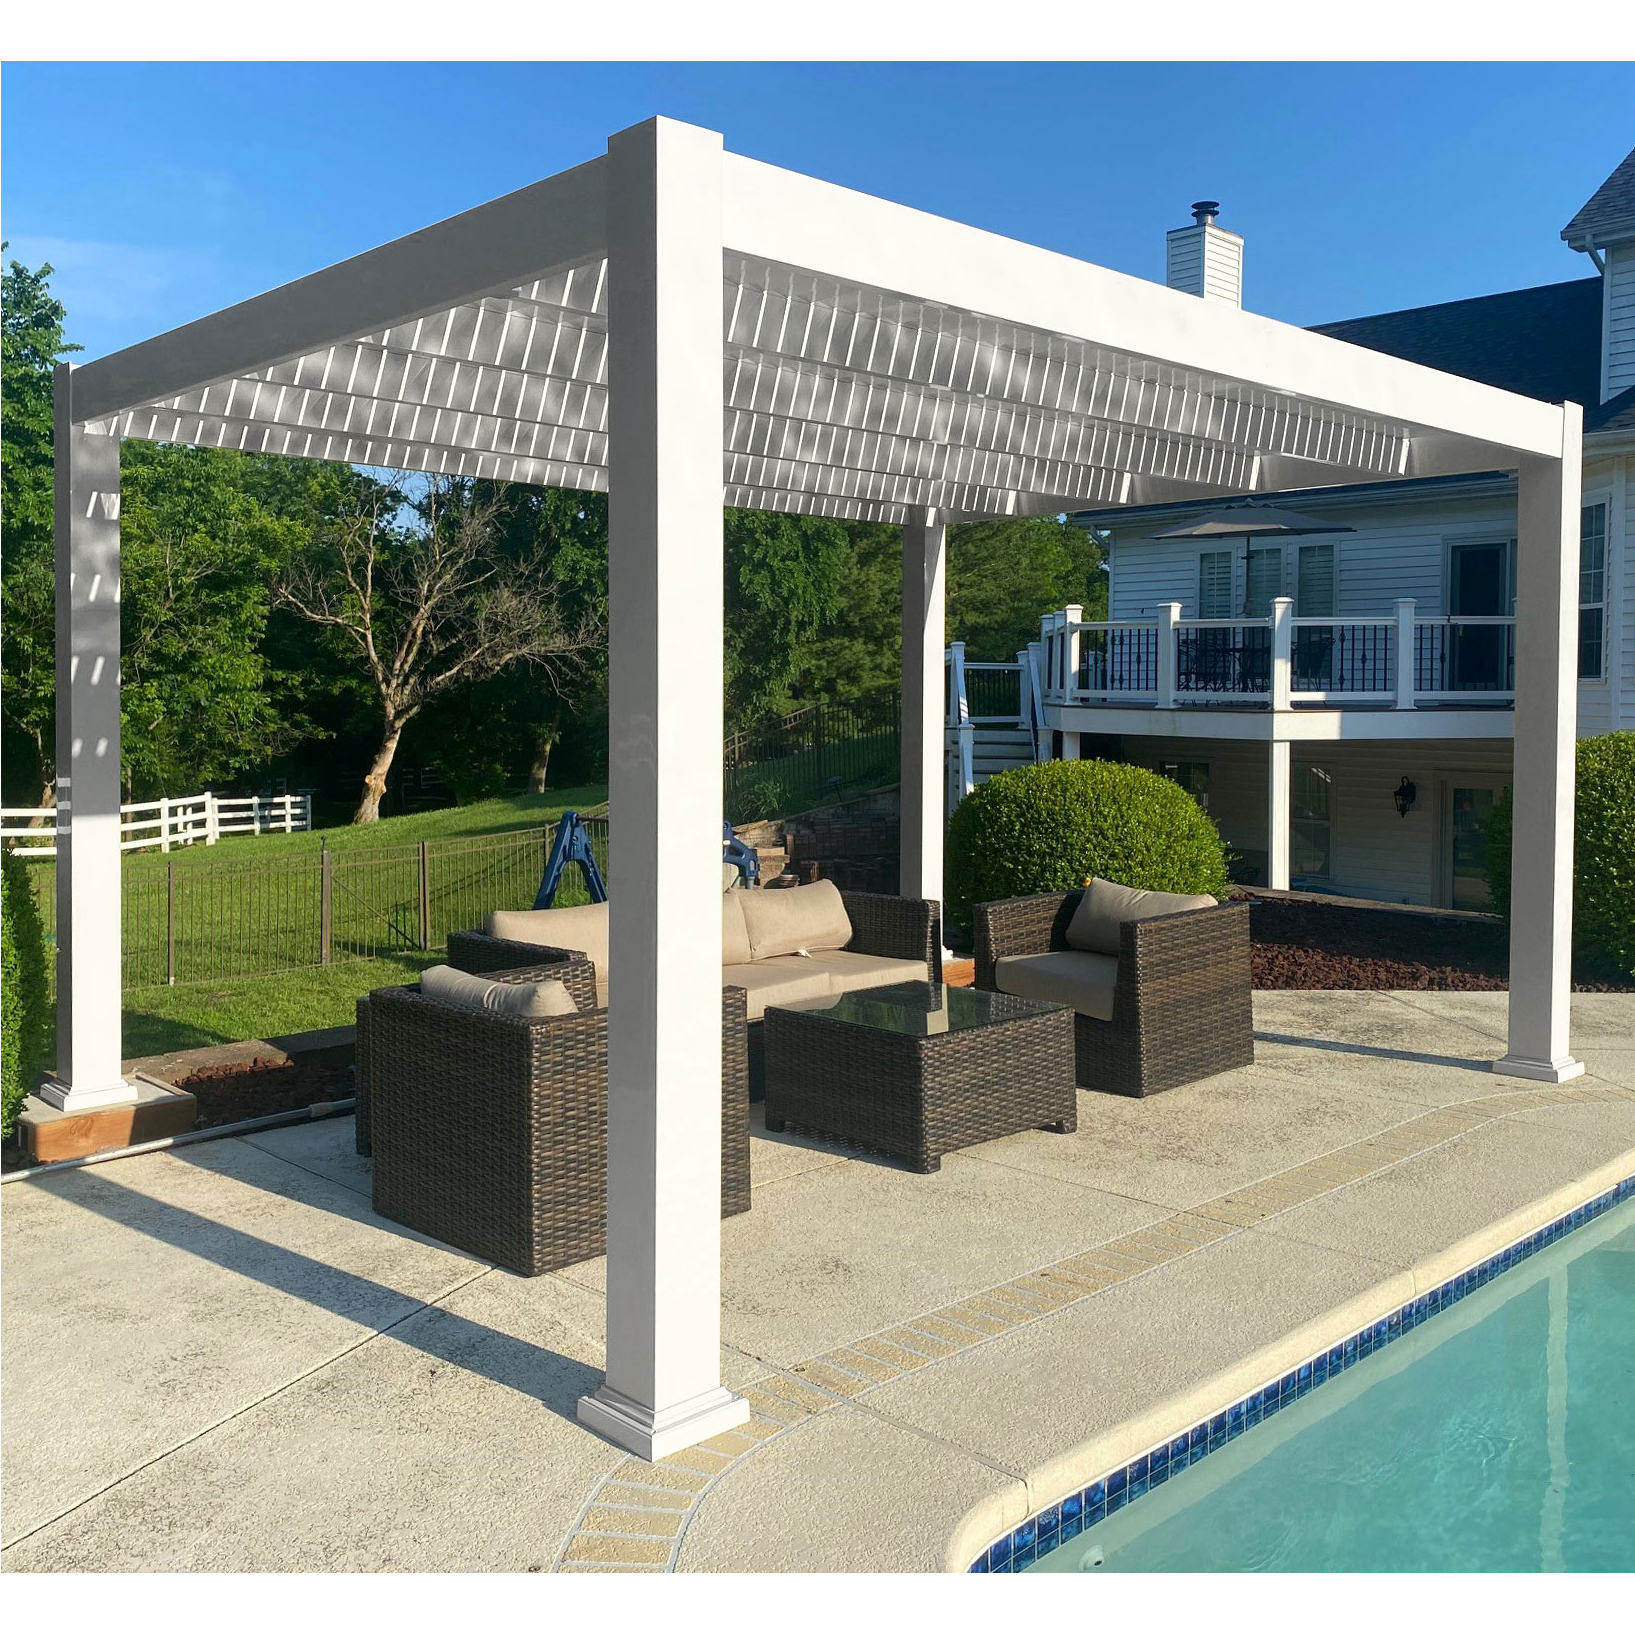 Picture of a white free-standing modern pergola over an outdoor patio dining set next to a pool